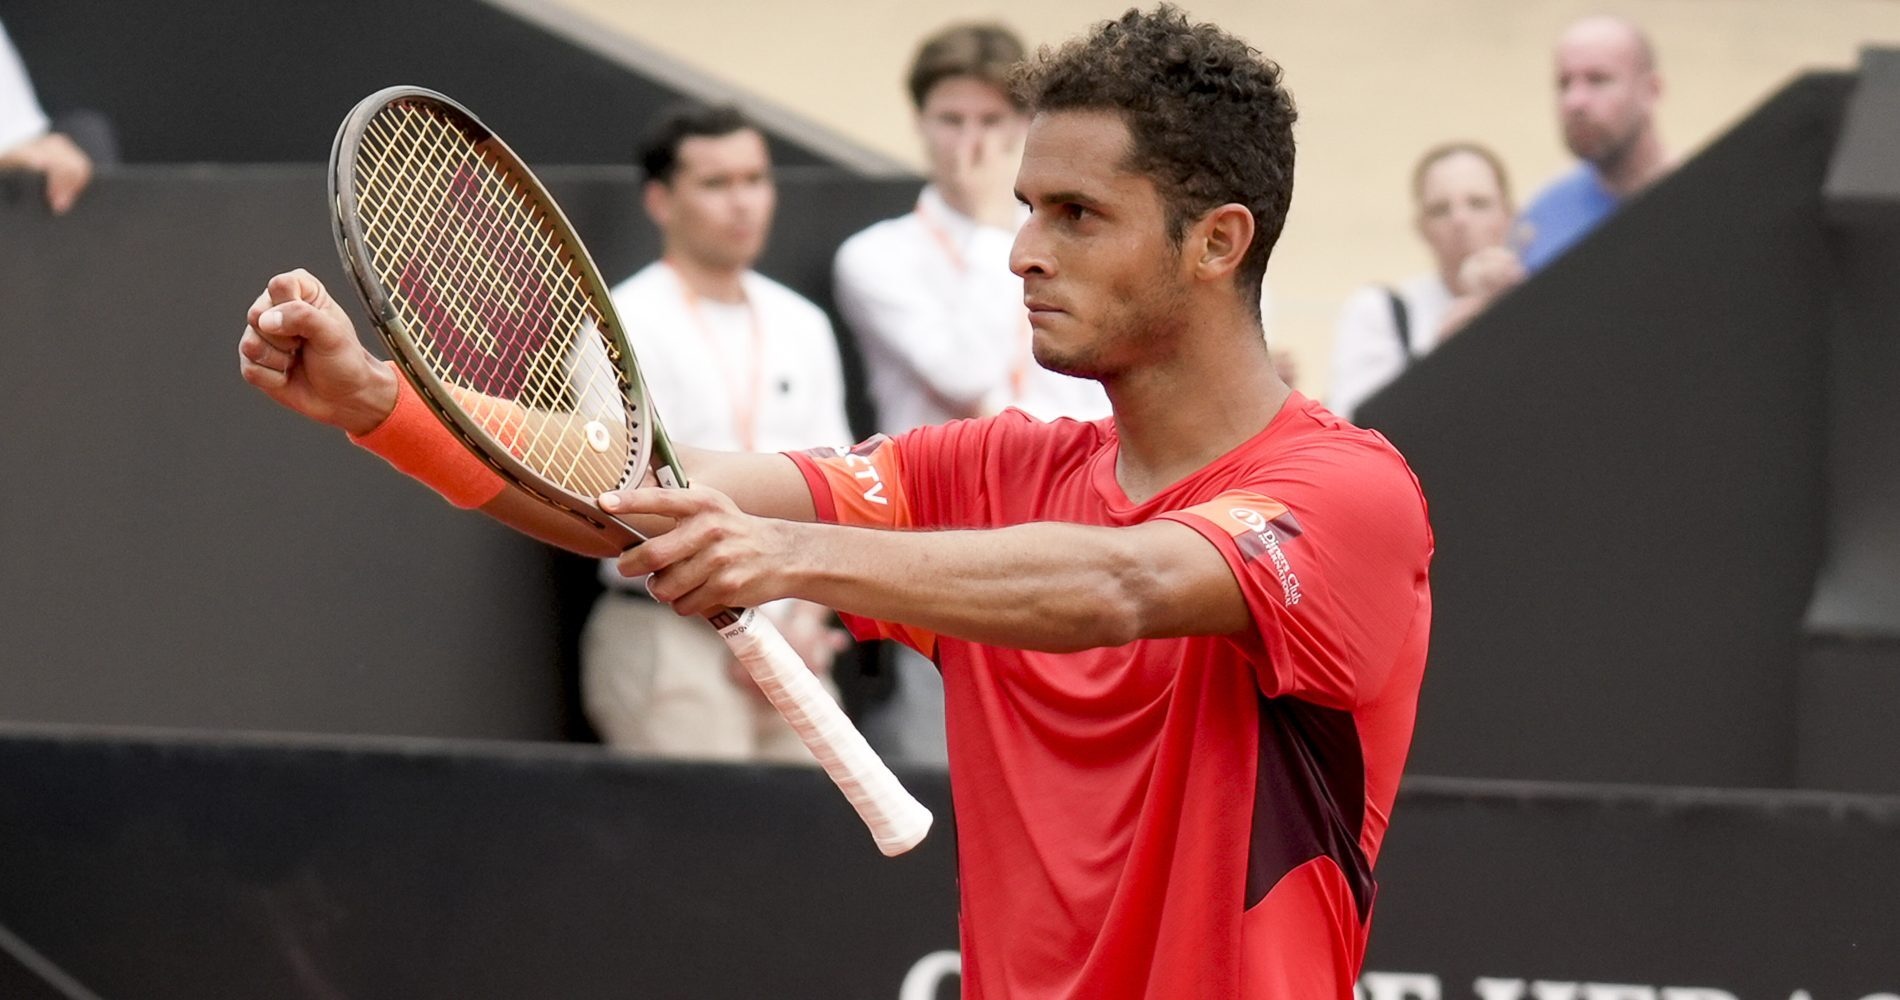 Juan Pablo Varillas surprises Ramos in the 1st round to clash vs Cerundolo  at the Open Parc - LYON RESULTS - Tennis Tonic - News, Predictions, H2H,  Live Scores, stats